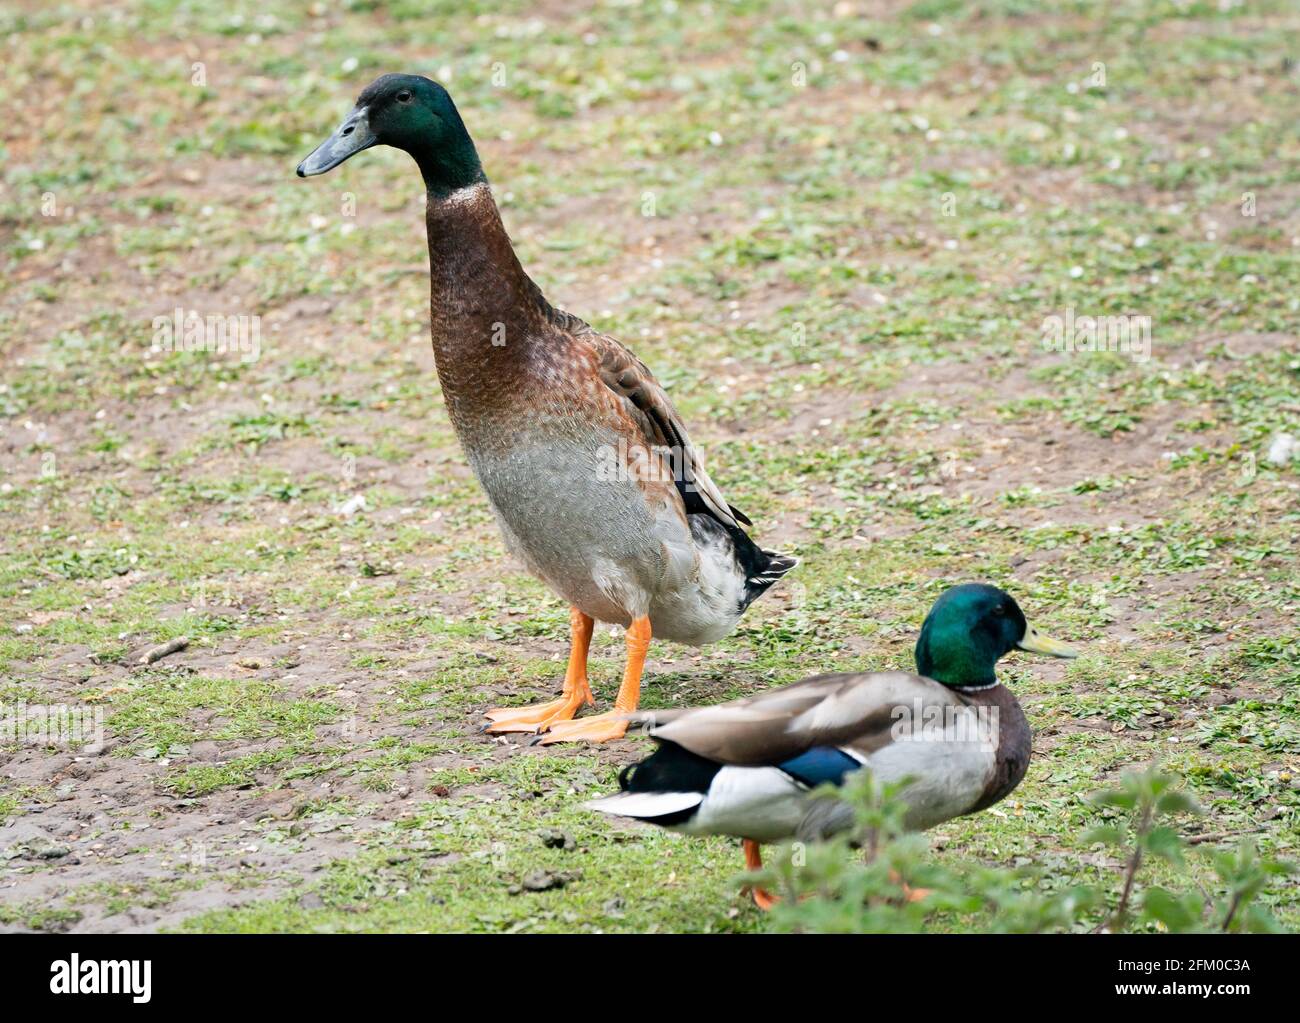 York university campus duck named Long Boi who went viral due to his impressive stature. It is believed that the very large duck is a cross between a Mallard and an Indian Runner duck. Picture date: Monday May 3, 2021. Stock Photo